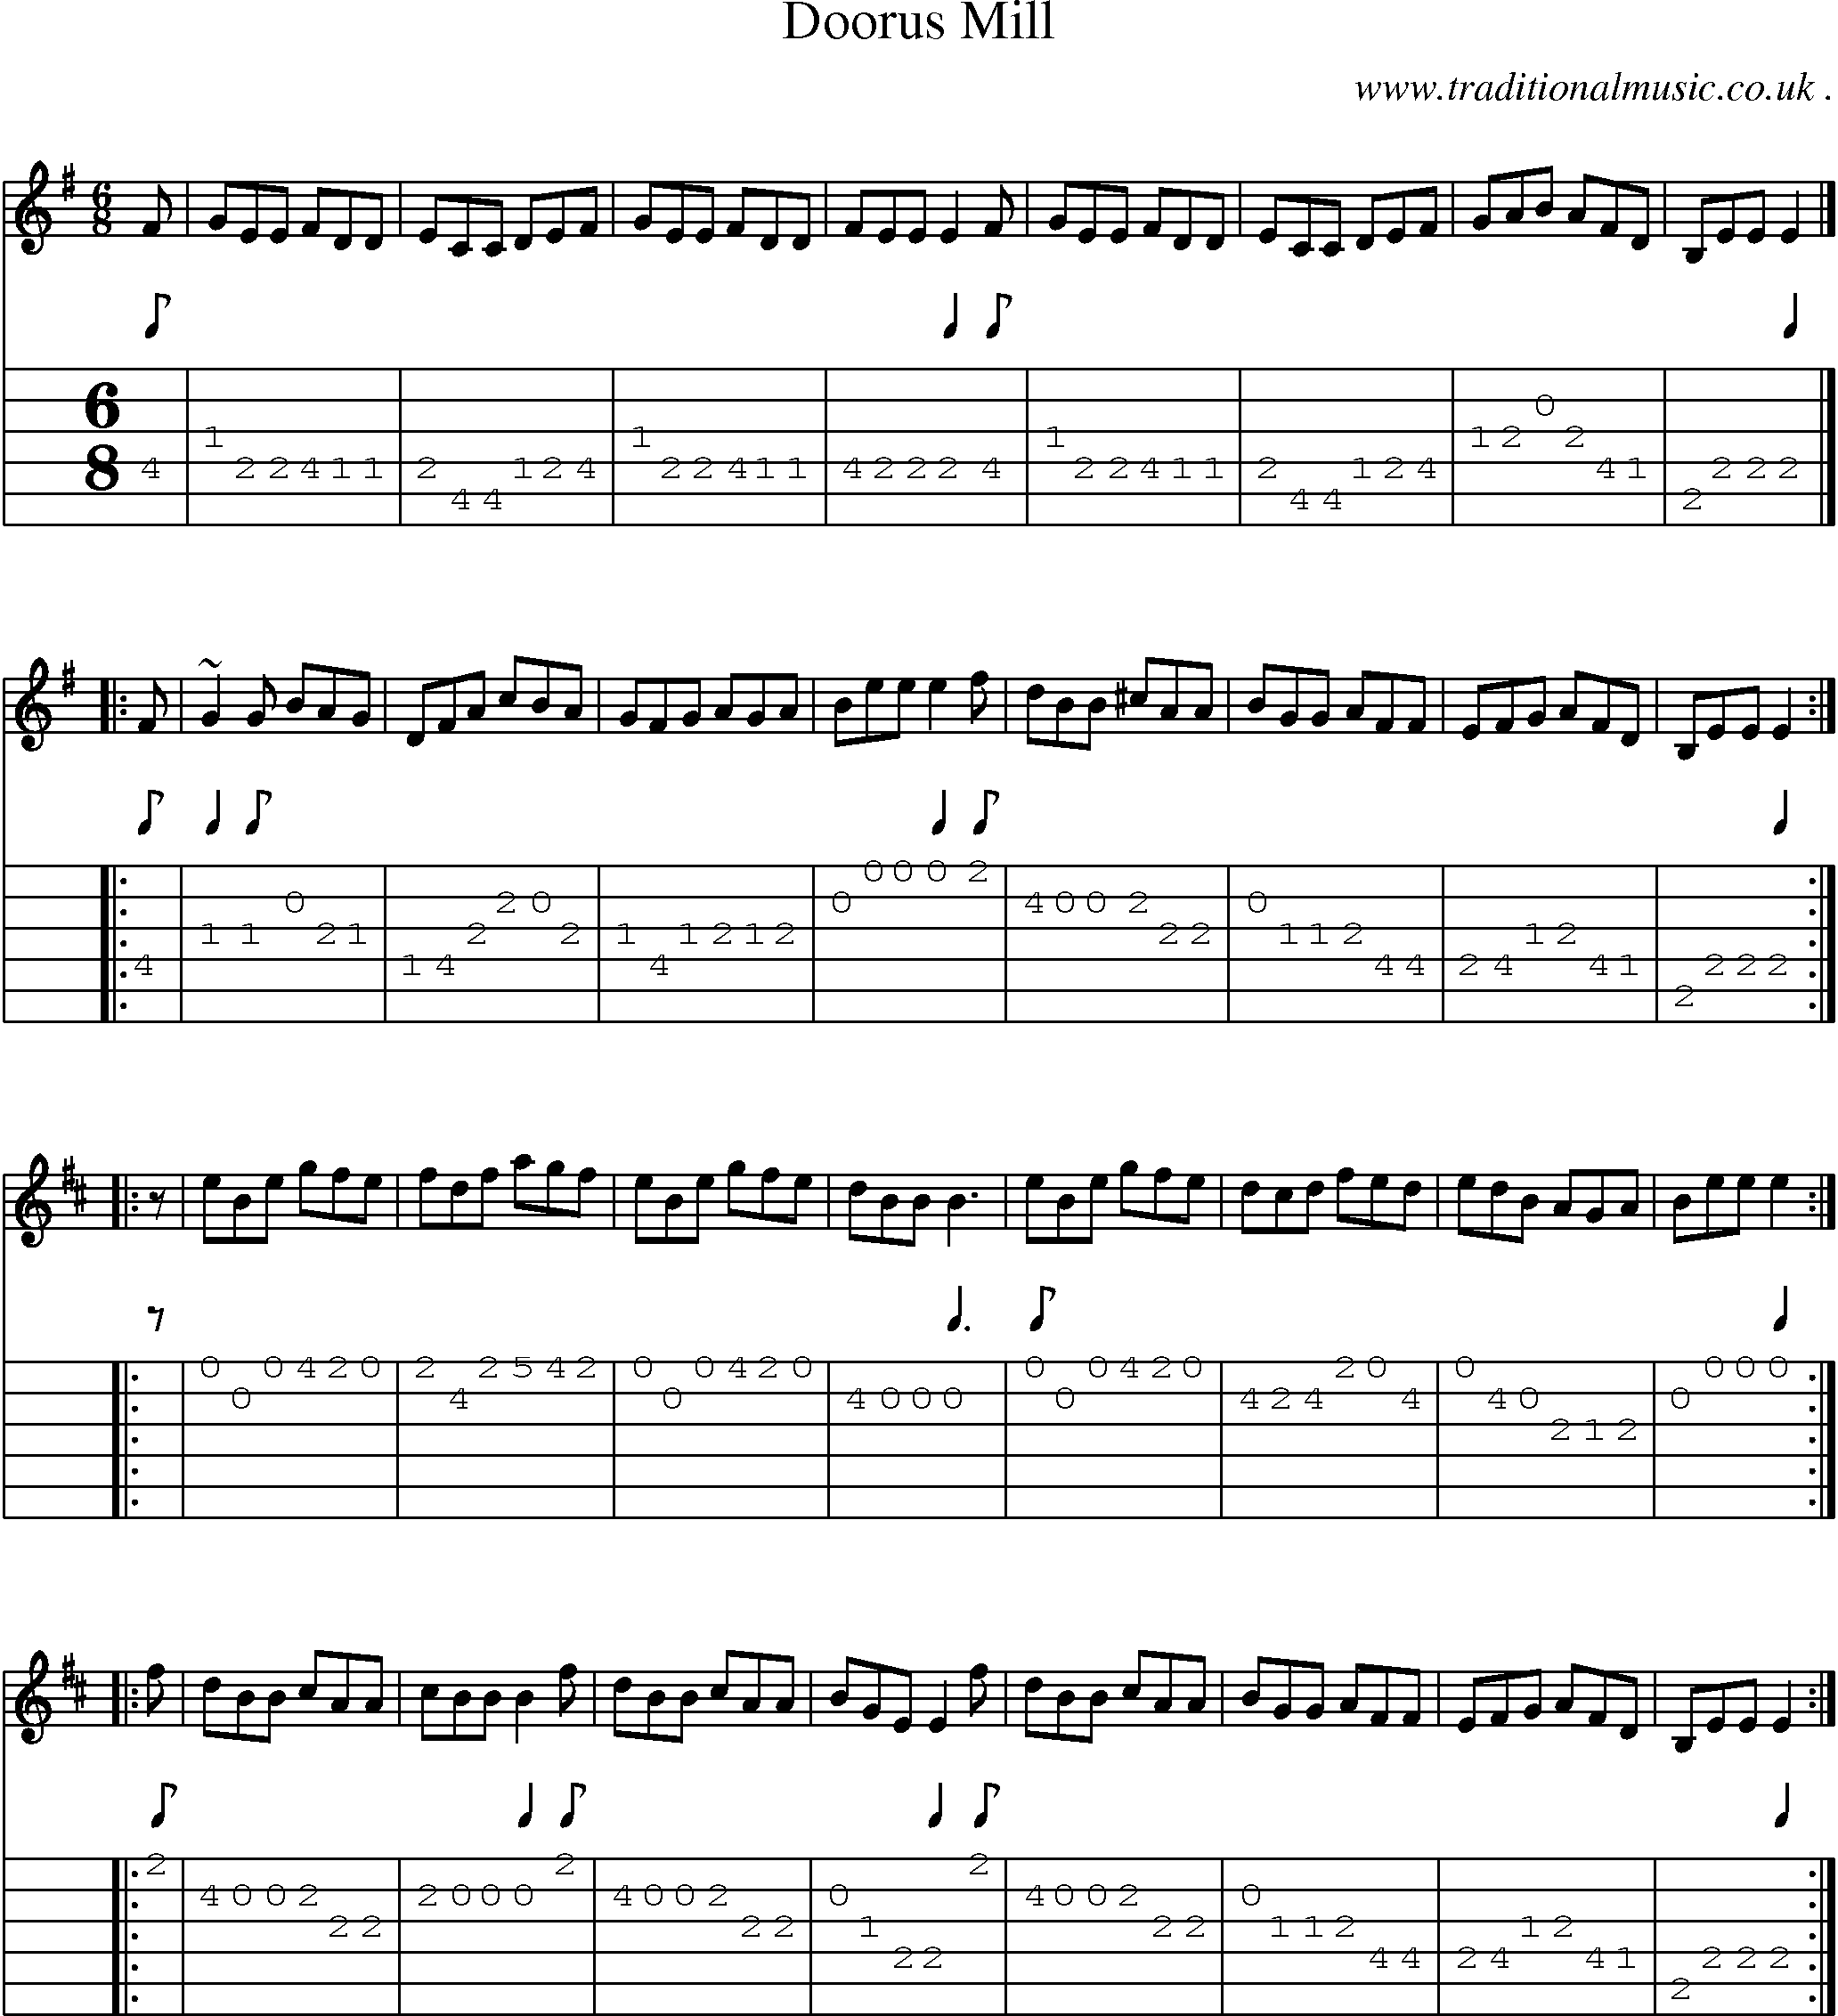 Sheet-music  score, Chords and Guitar Tabs for Doorus Mill